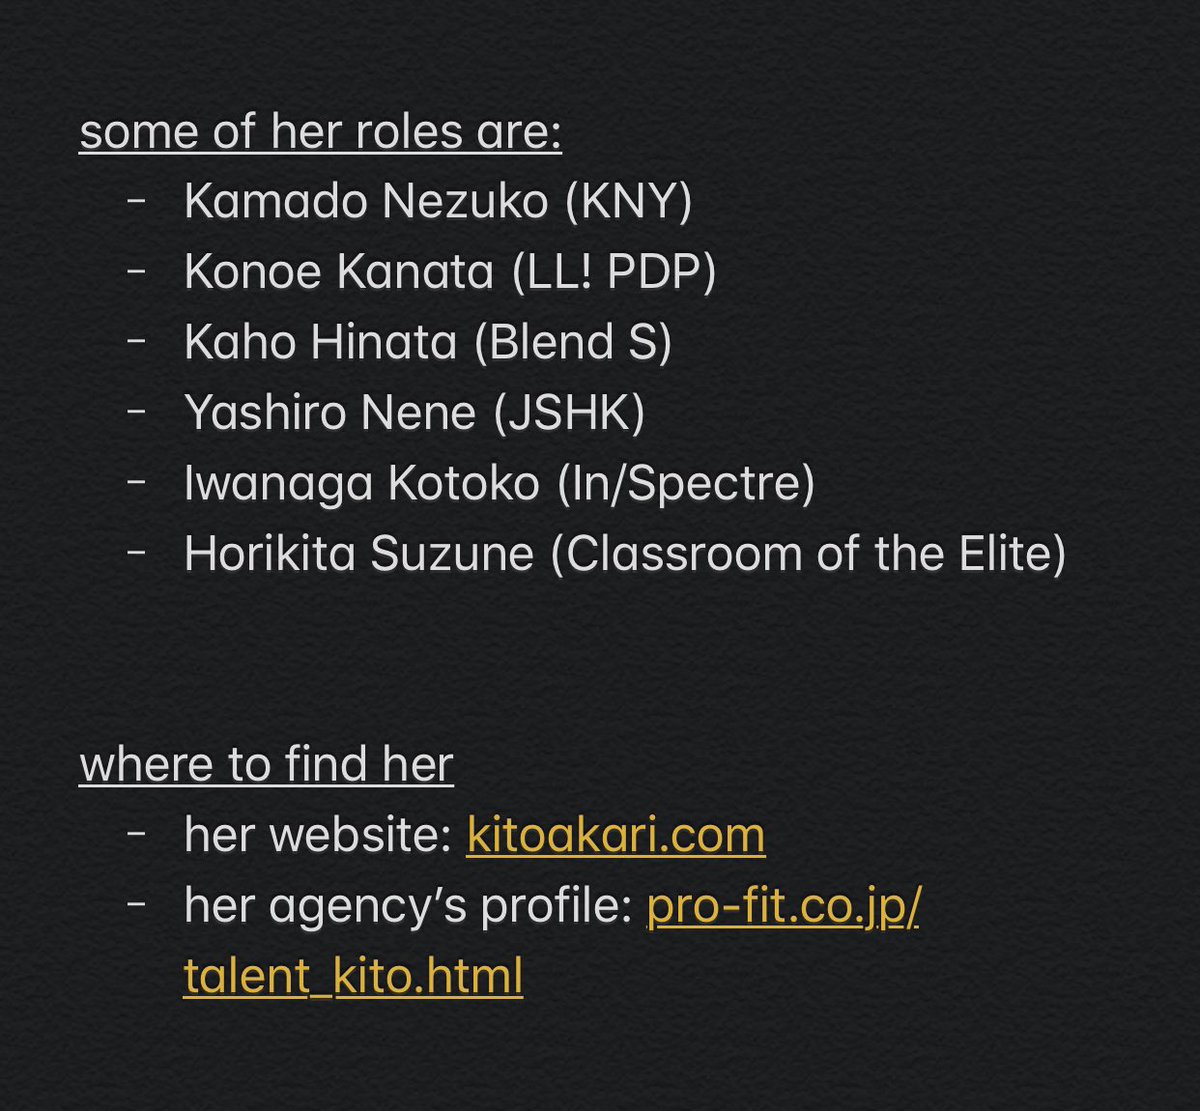 kito akariseems like this industry is full of beautiful women damn  she made her debut in 2014 and started landing major roles in 2016. she also debuted under Pony Canyon as a soloist in October 2019. you probably won’t find a seiyuu that doesn’t fangirl/fanboy over her